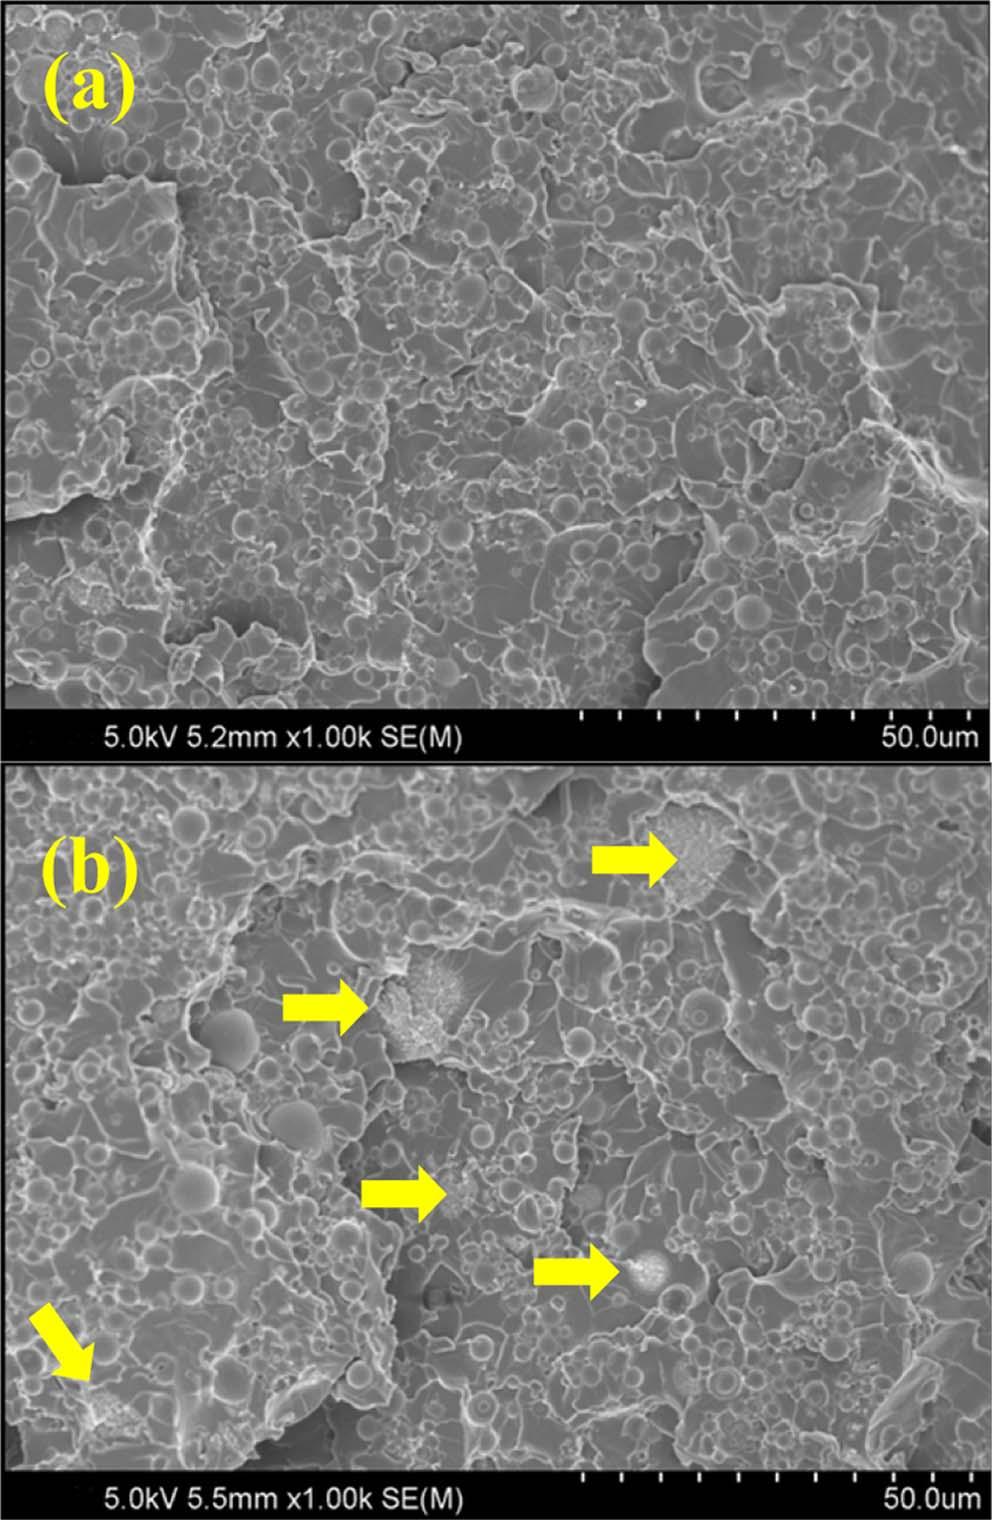 310 Ryun Oh, Byeong Il You, Ji Ho Ahn, Gyo Woo Lee Fig. 3. Fracture surface images for specimens containing 0.4 (a) and 0.8 wt% (b) carbon nanotubes filler.